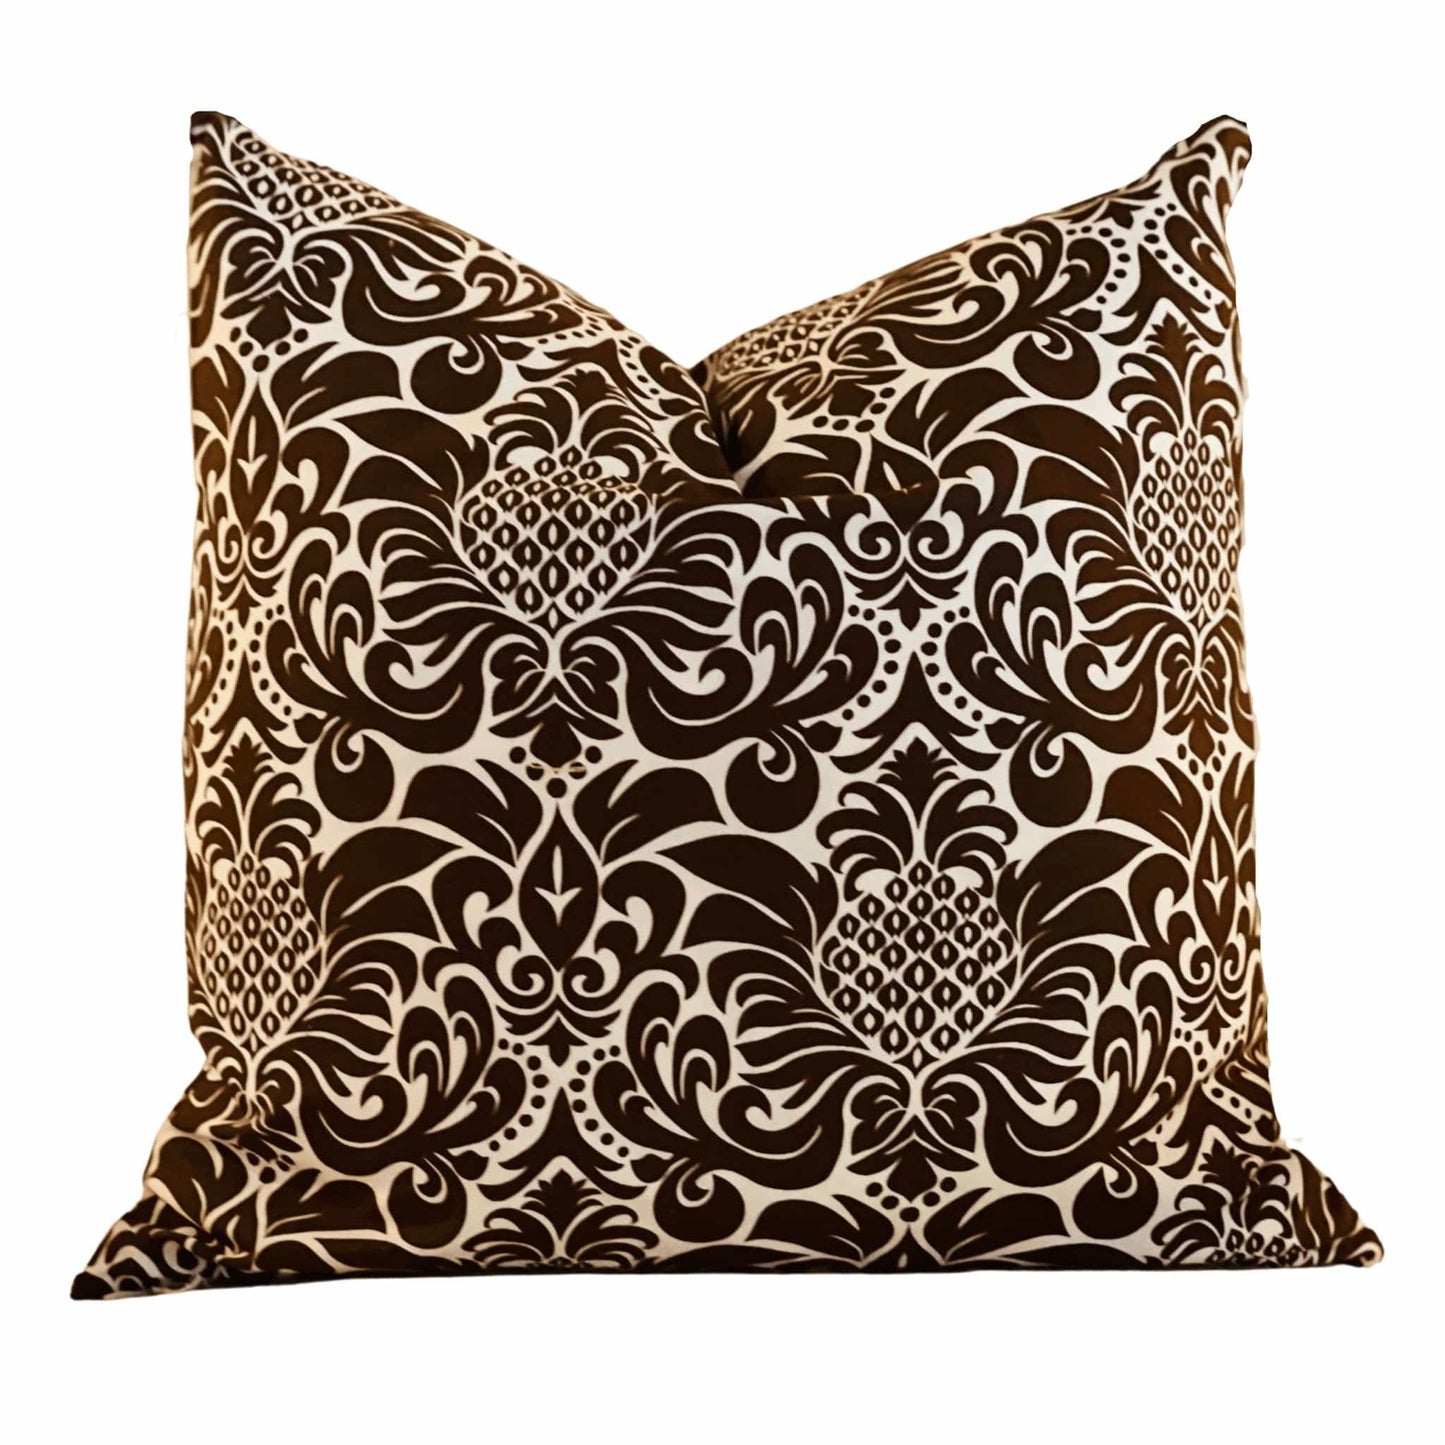 Hen House Linens gracious chocolate brown printed cloth 16" x 16" pillow covers